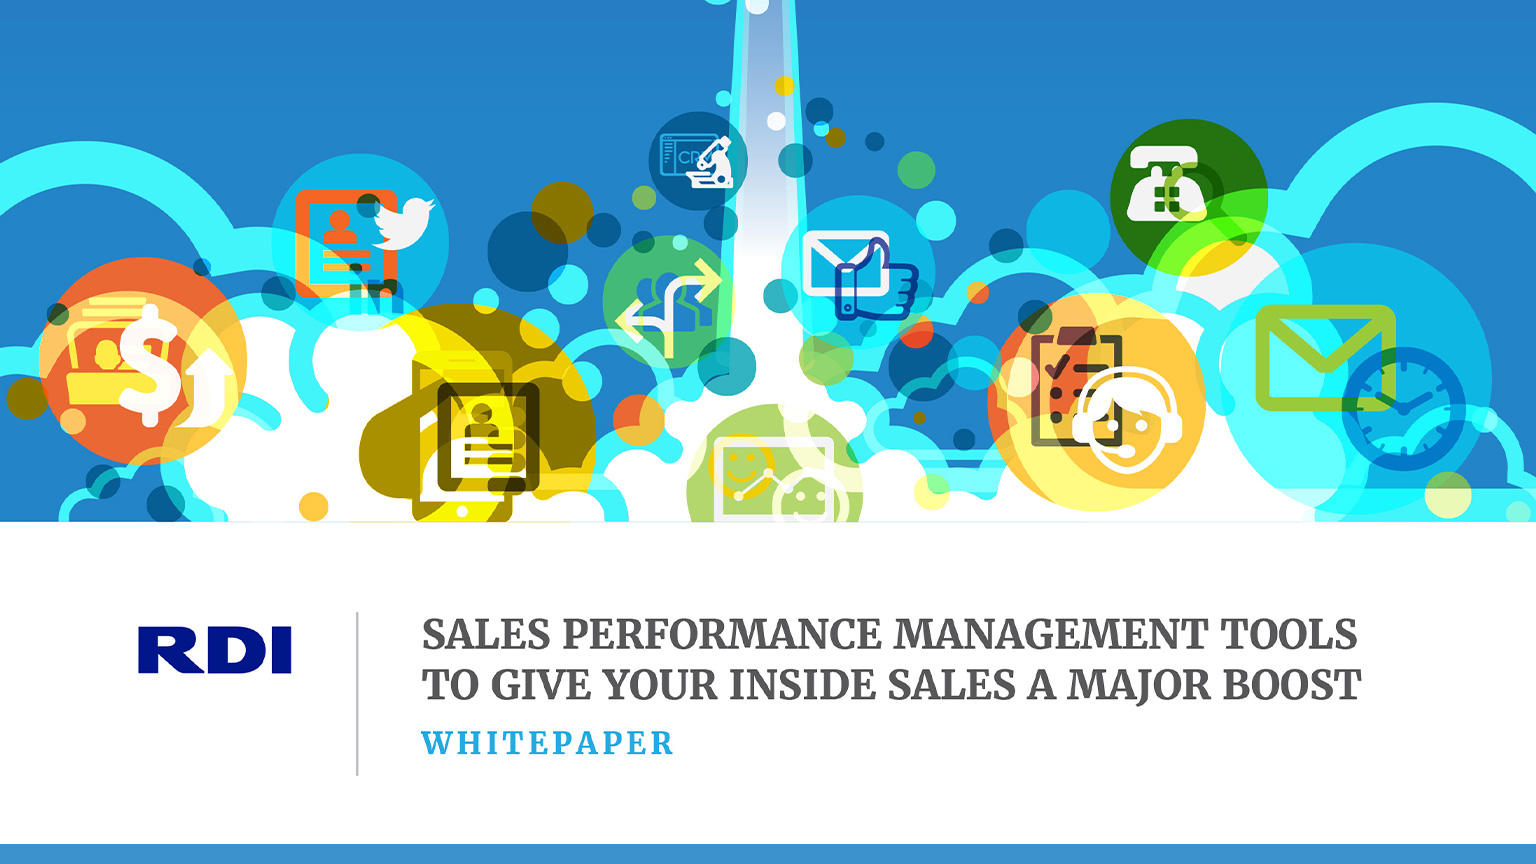 Sales Performance Management Tools to Give Your Inside Sales a Major Boost